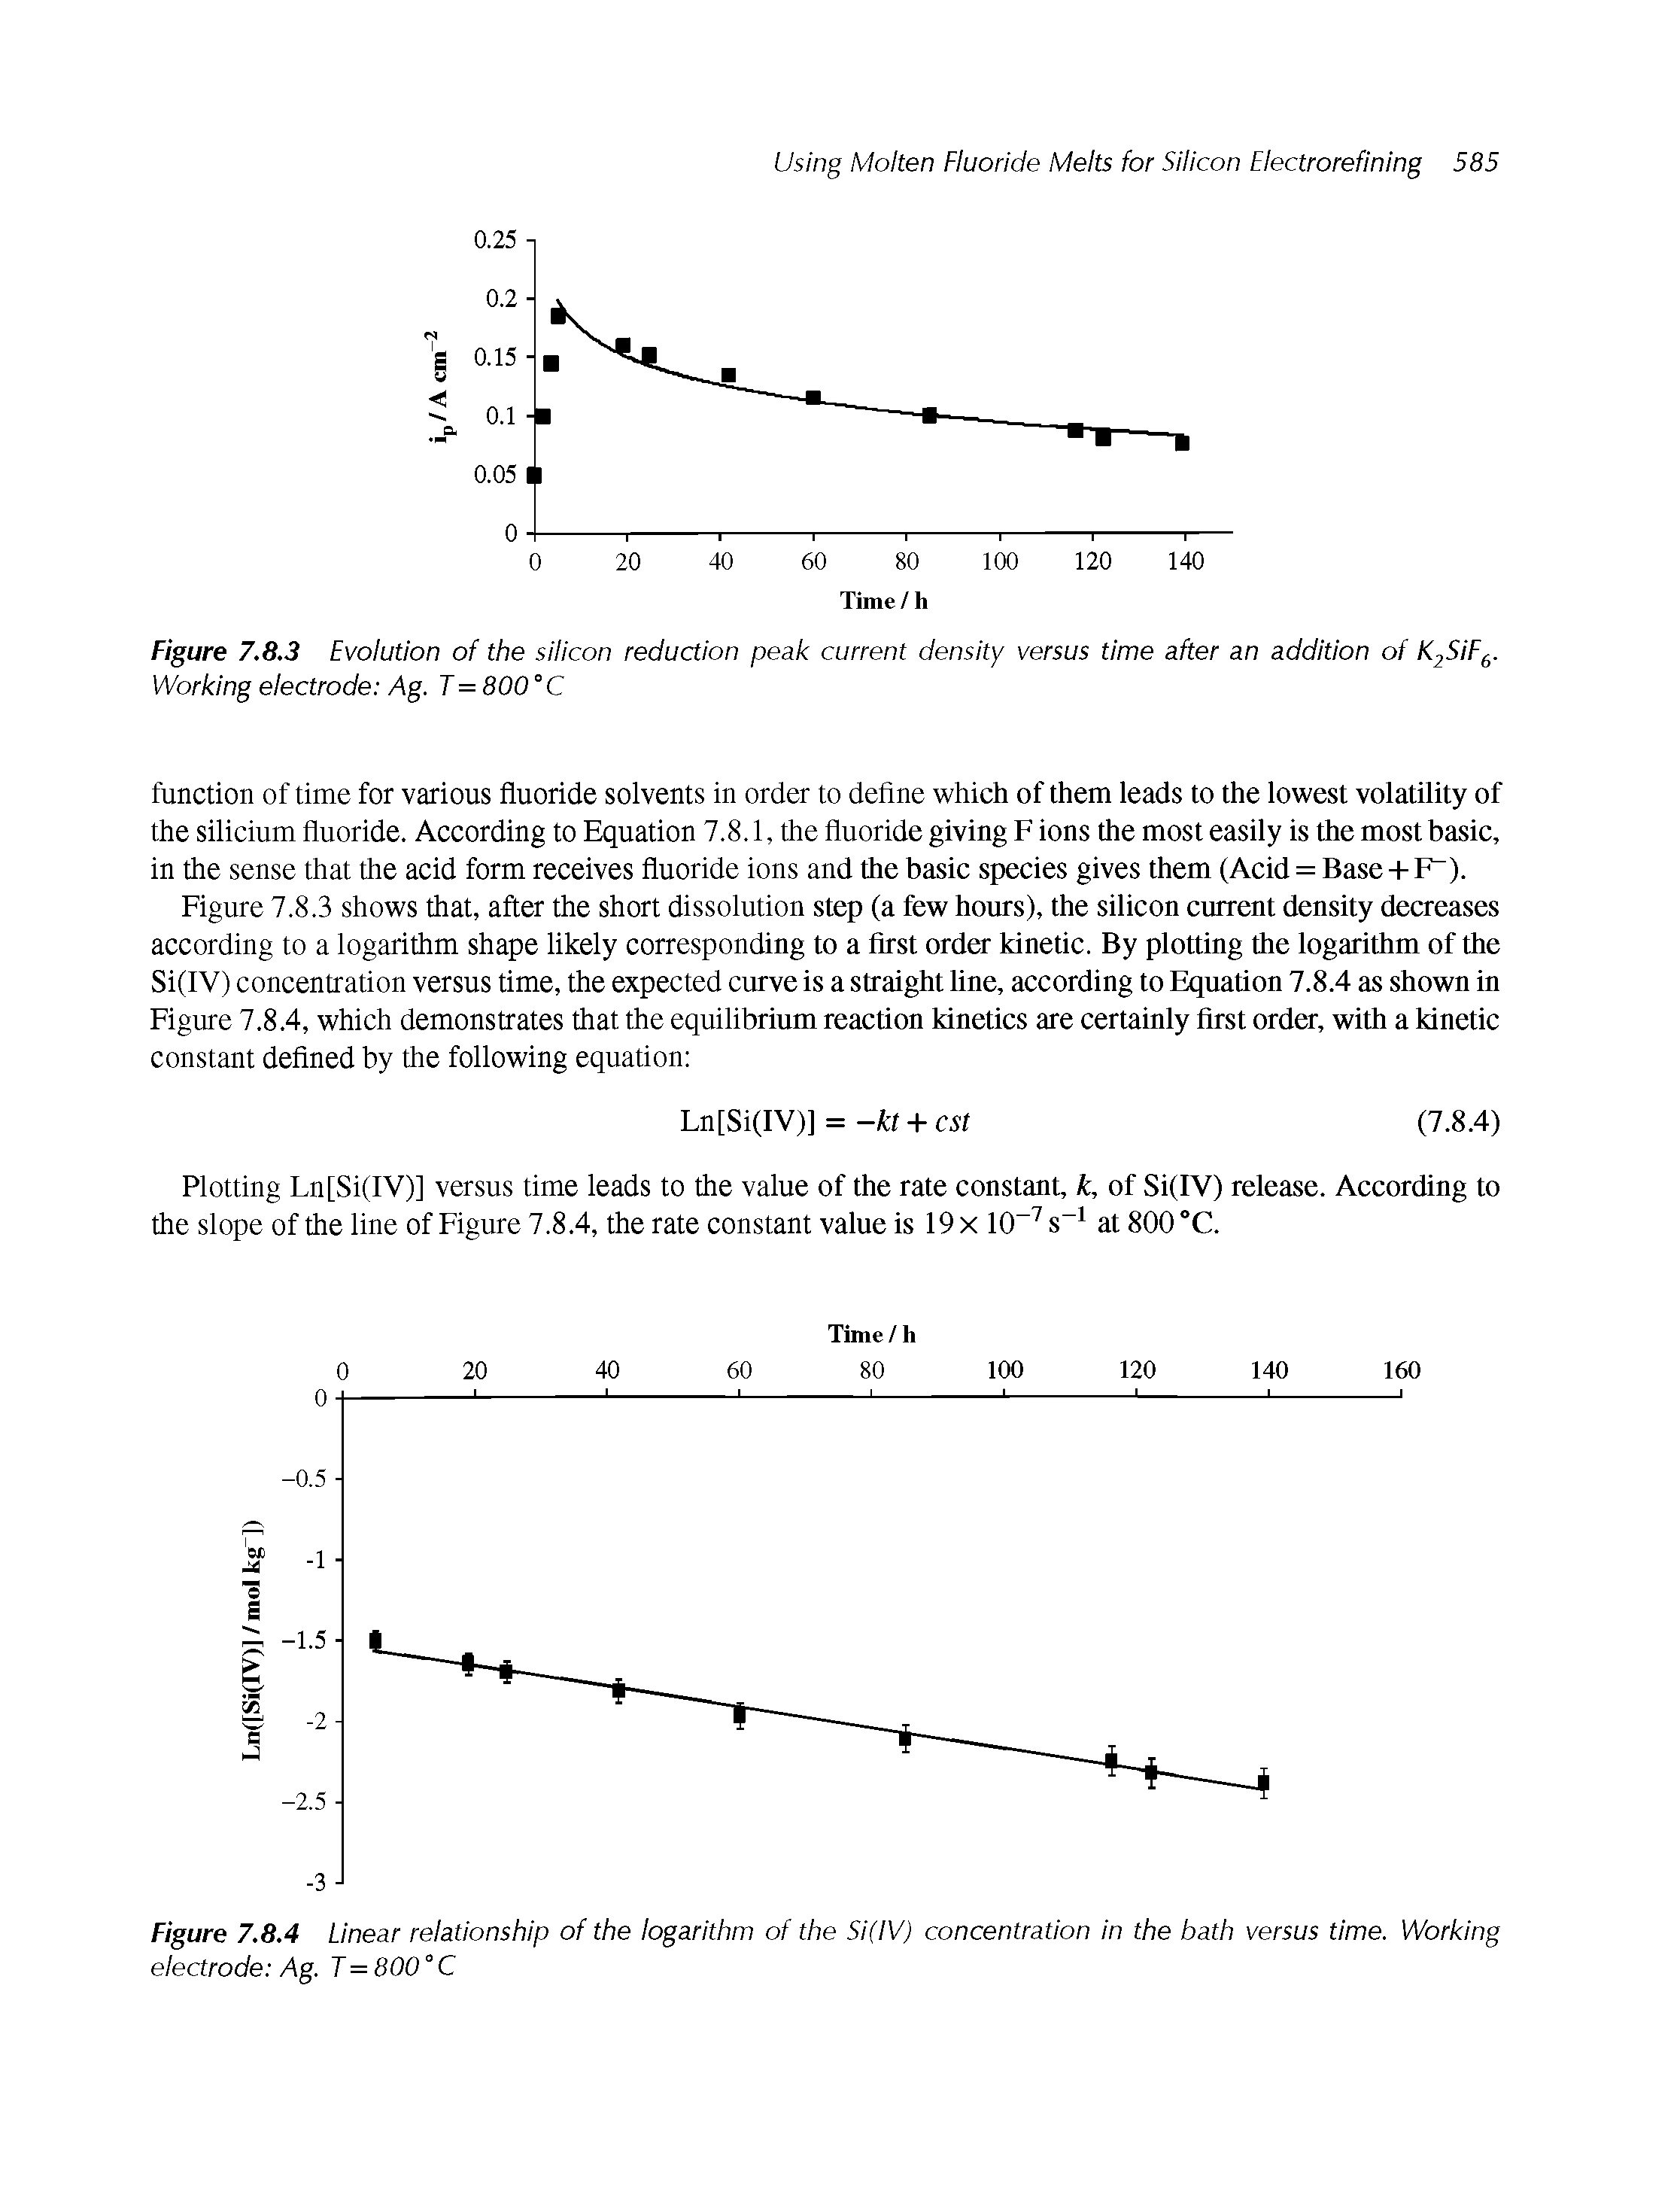 Figure 7.8.3 Evolution of the silicon reduction peak current density versus time after an addition of K2SiF. Working electrode Ag. T = 800°C...